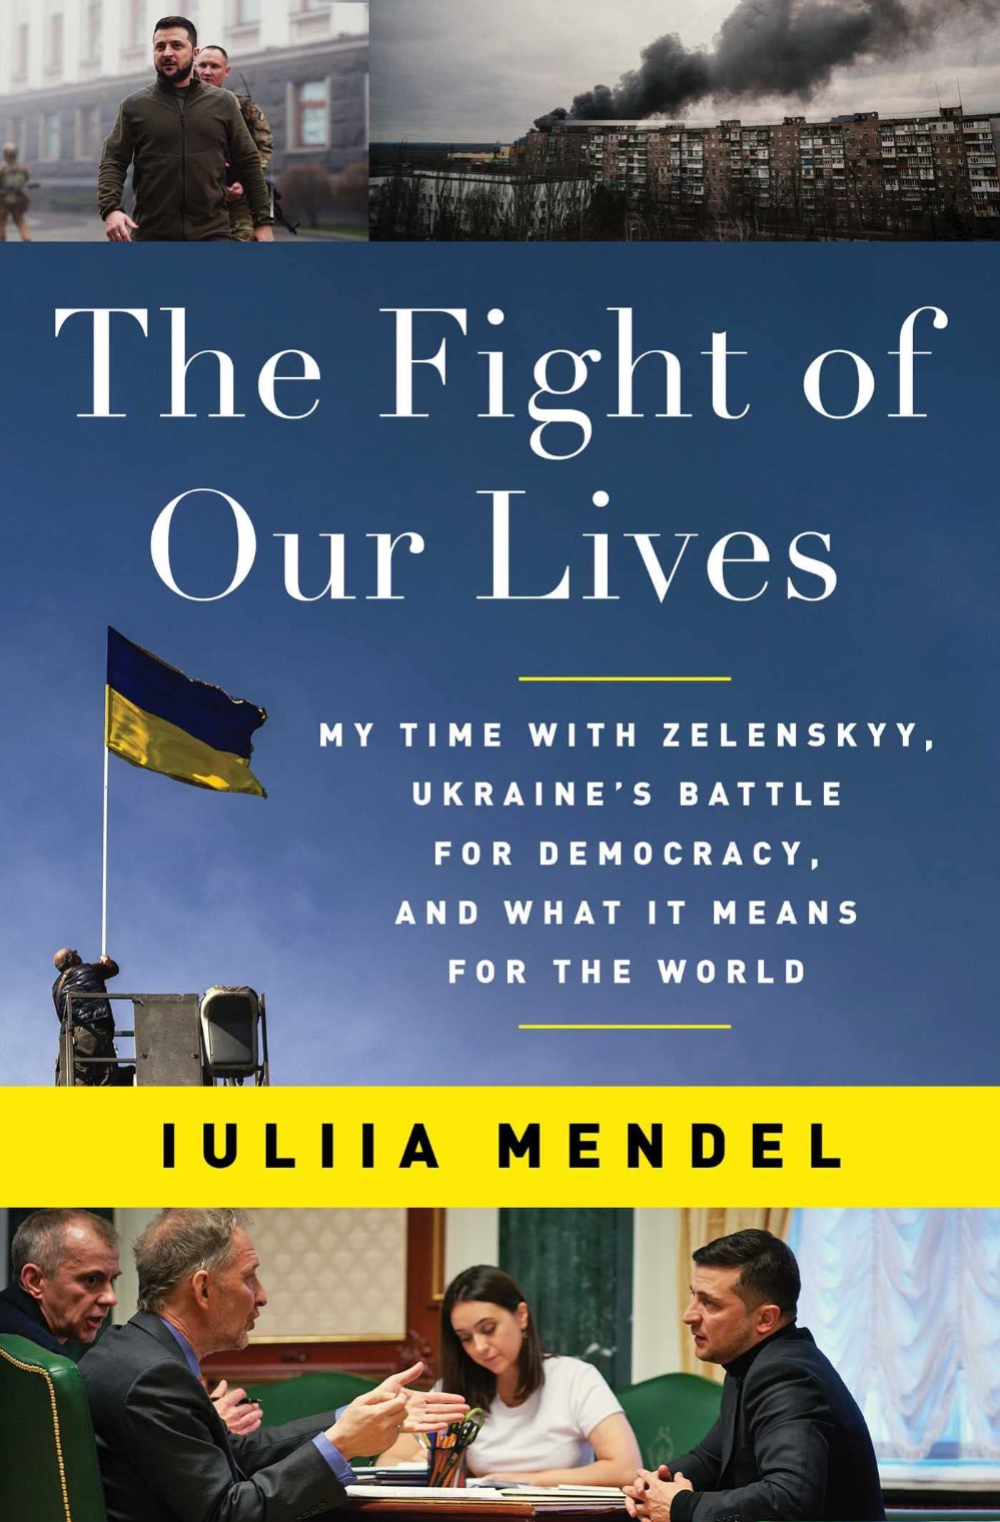 The Fight of Our Lives: My Time with Zelenskyy, Ukraine's Battle for Democracy and What it Means for the World by Iuliia Mendel